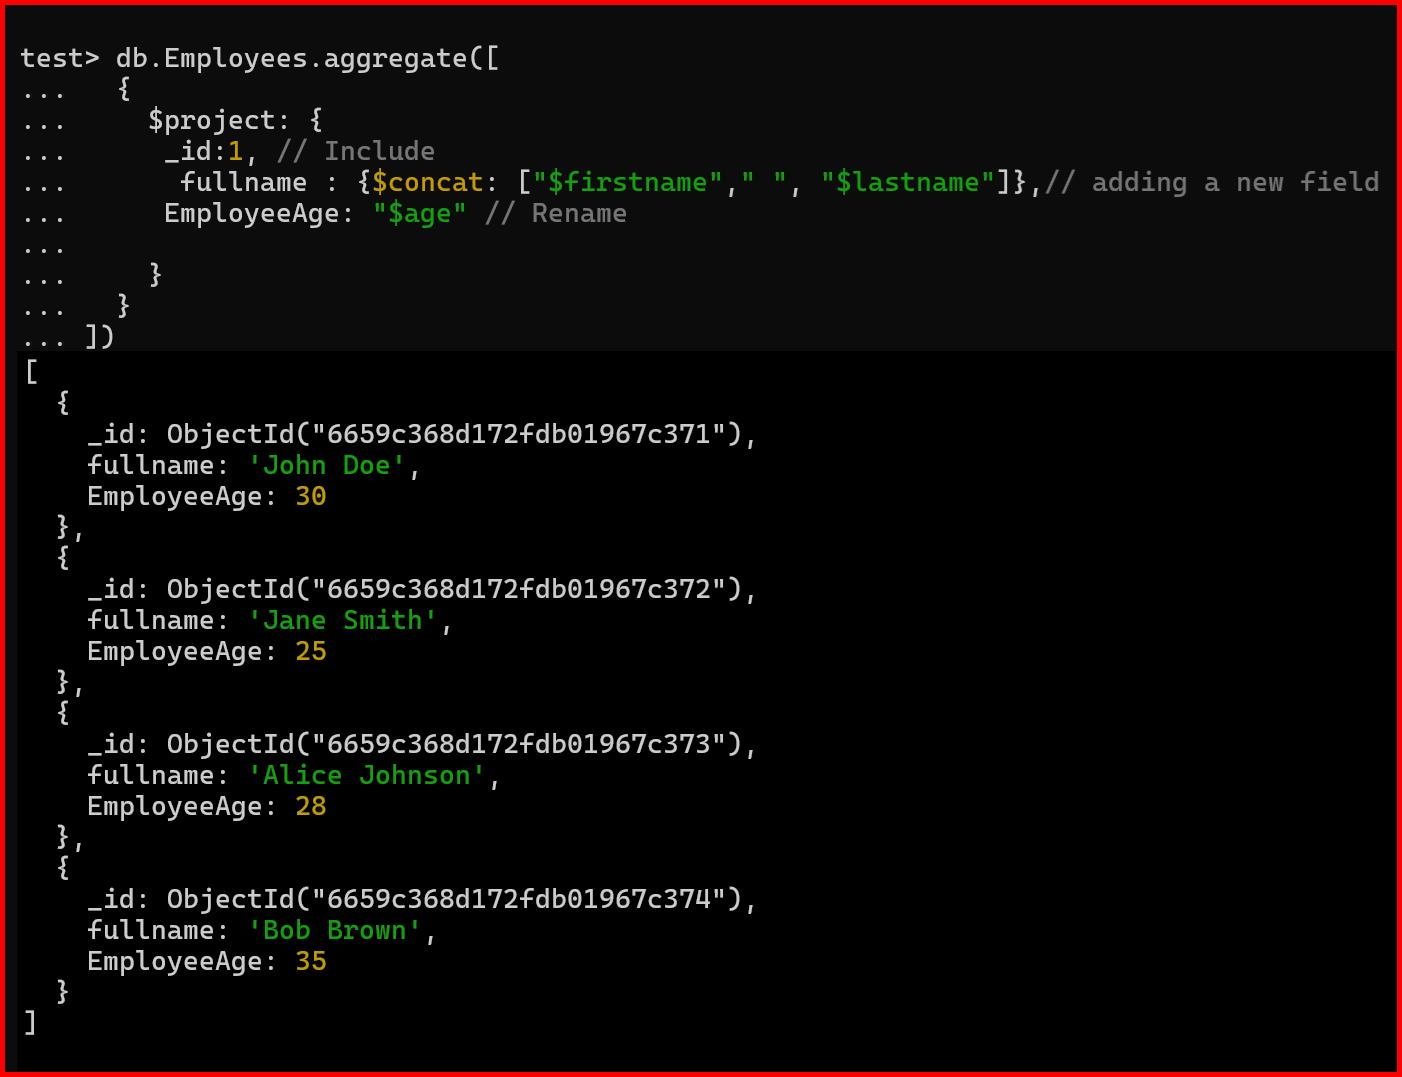 Picture showing the output of $project aggregation function in mongodb